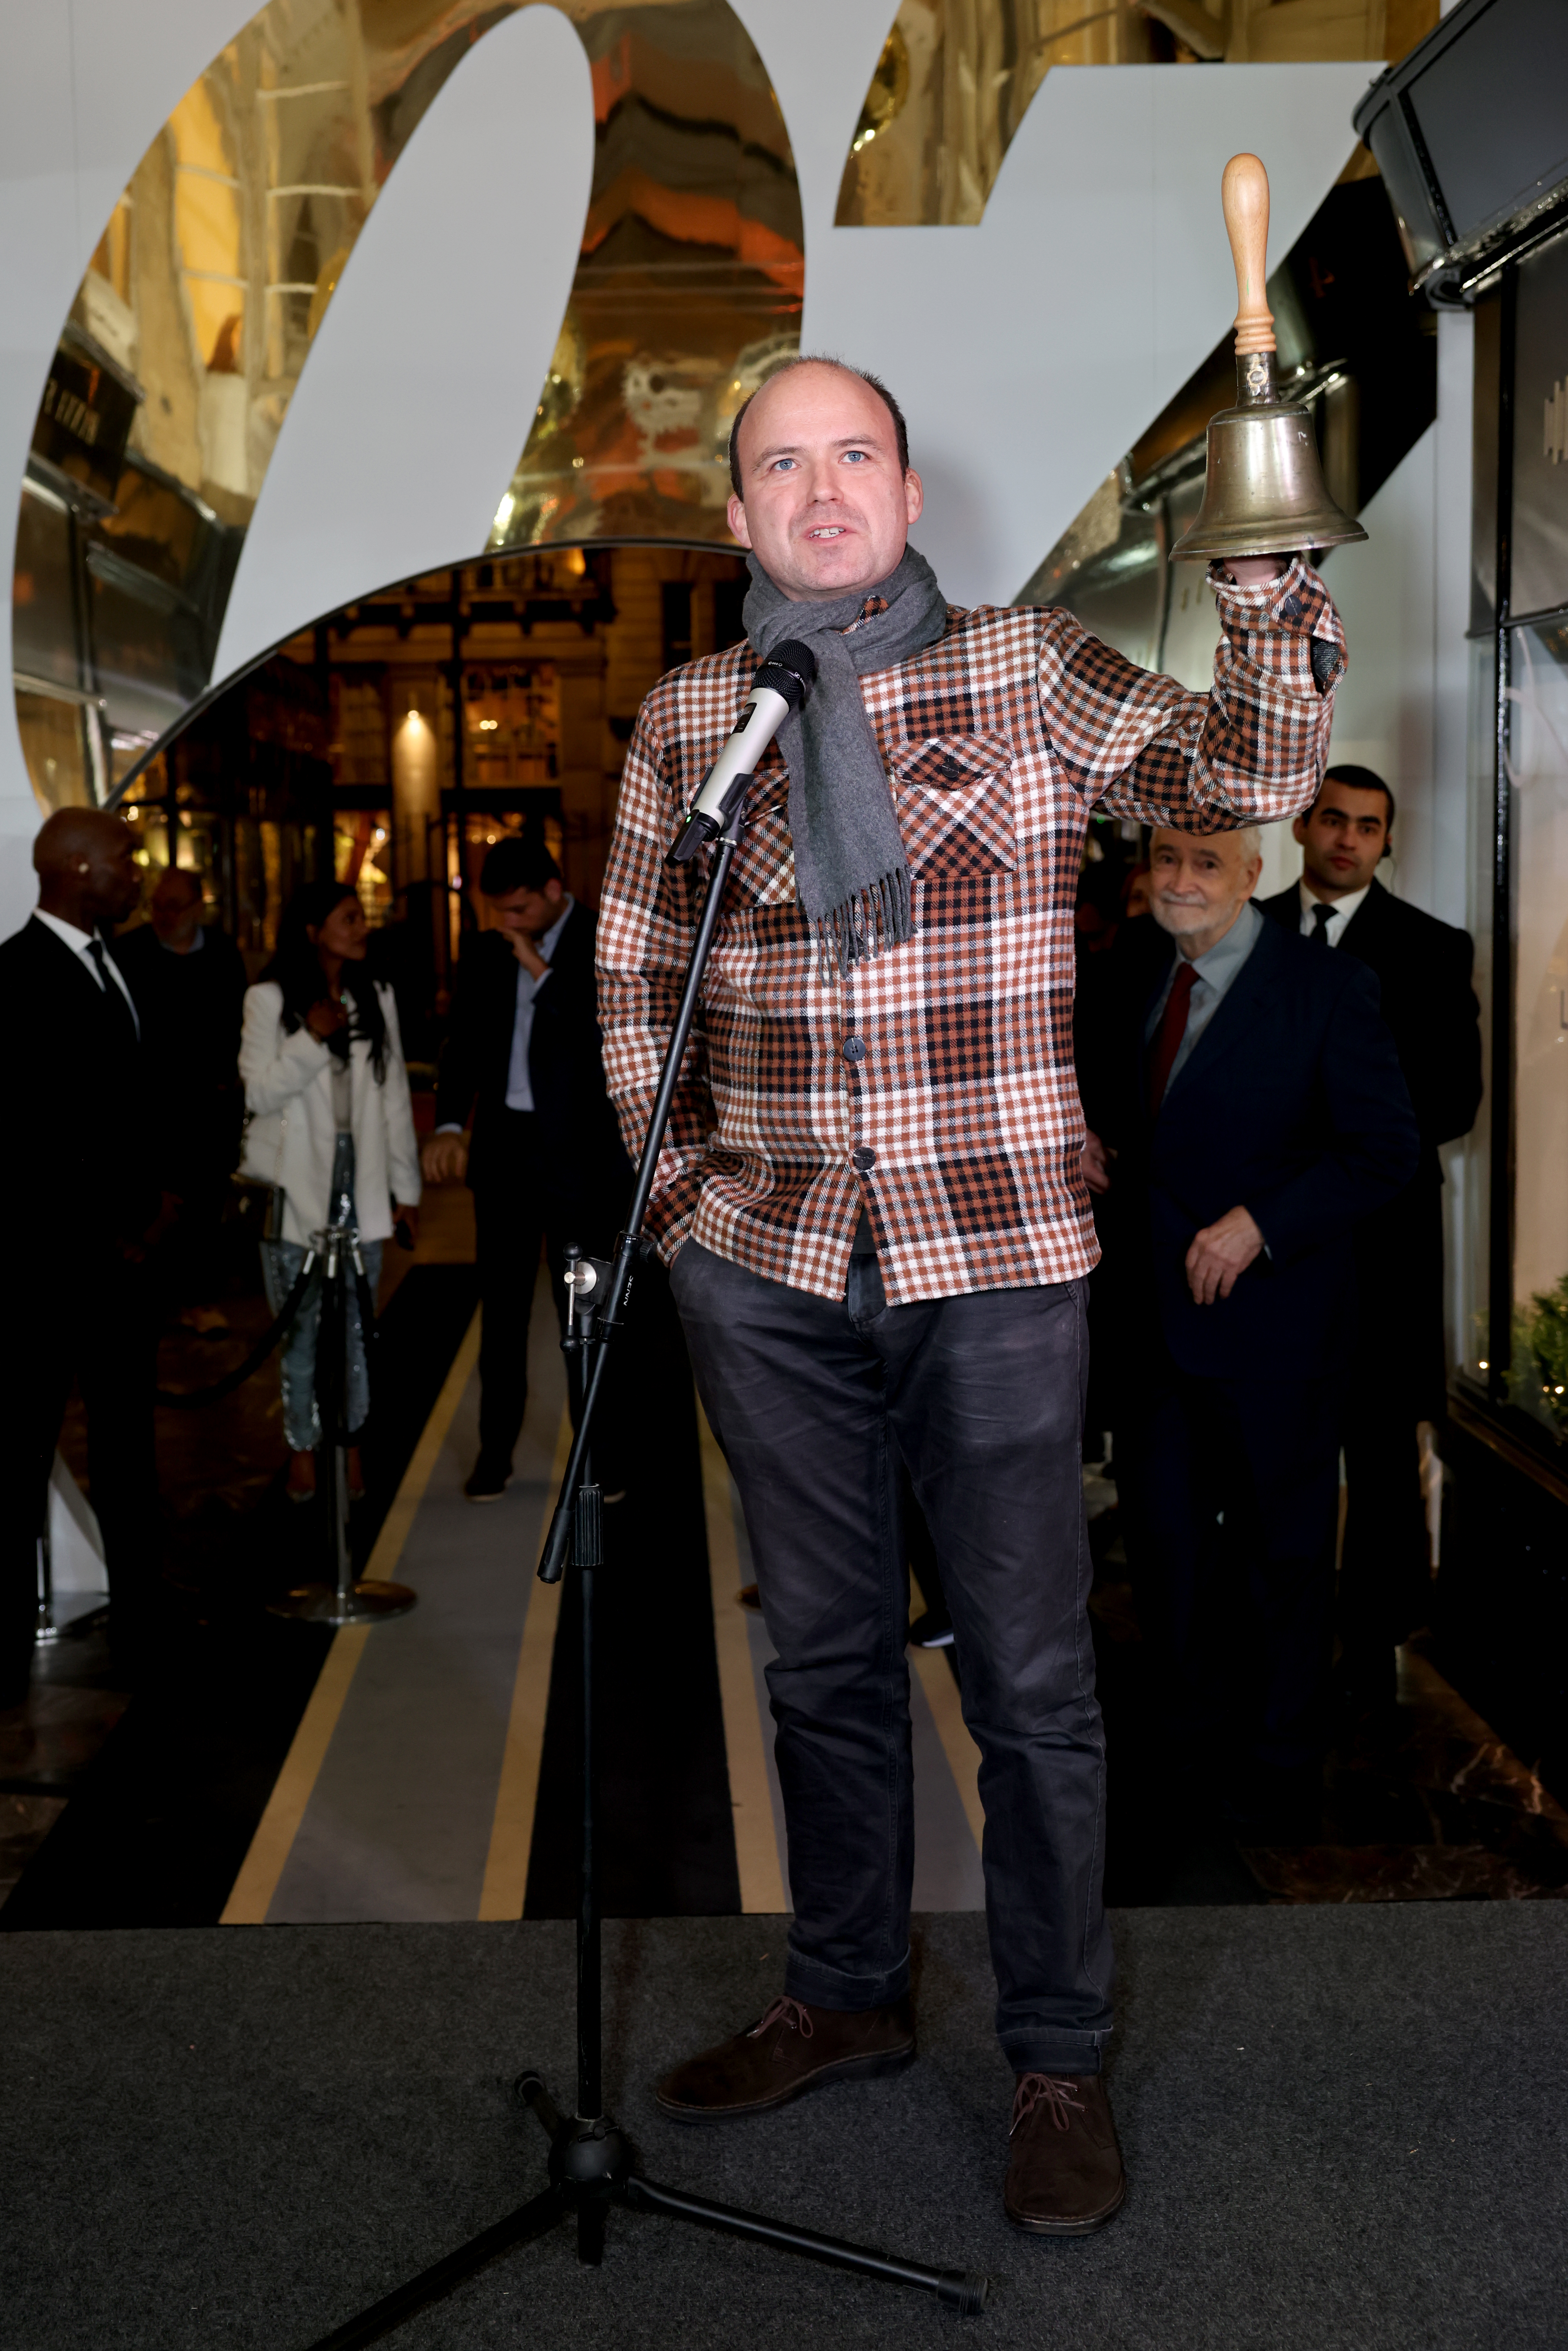 Rory Kinnear during the Christmas Lights Celebration at Burlington Arcade on November 17, 2021 in London, England | Source: Getty Images